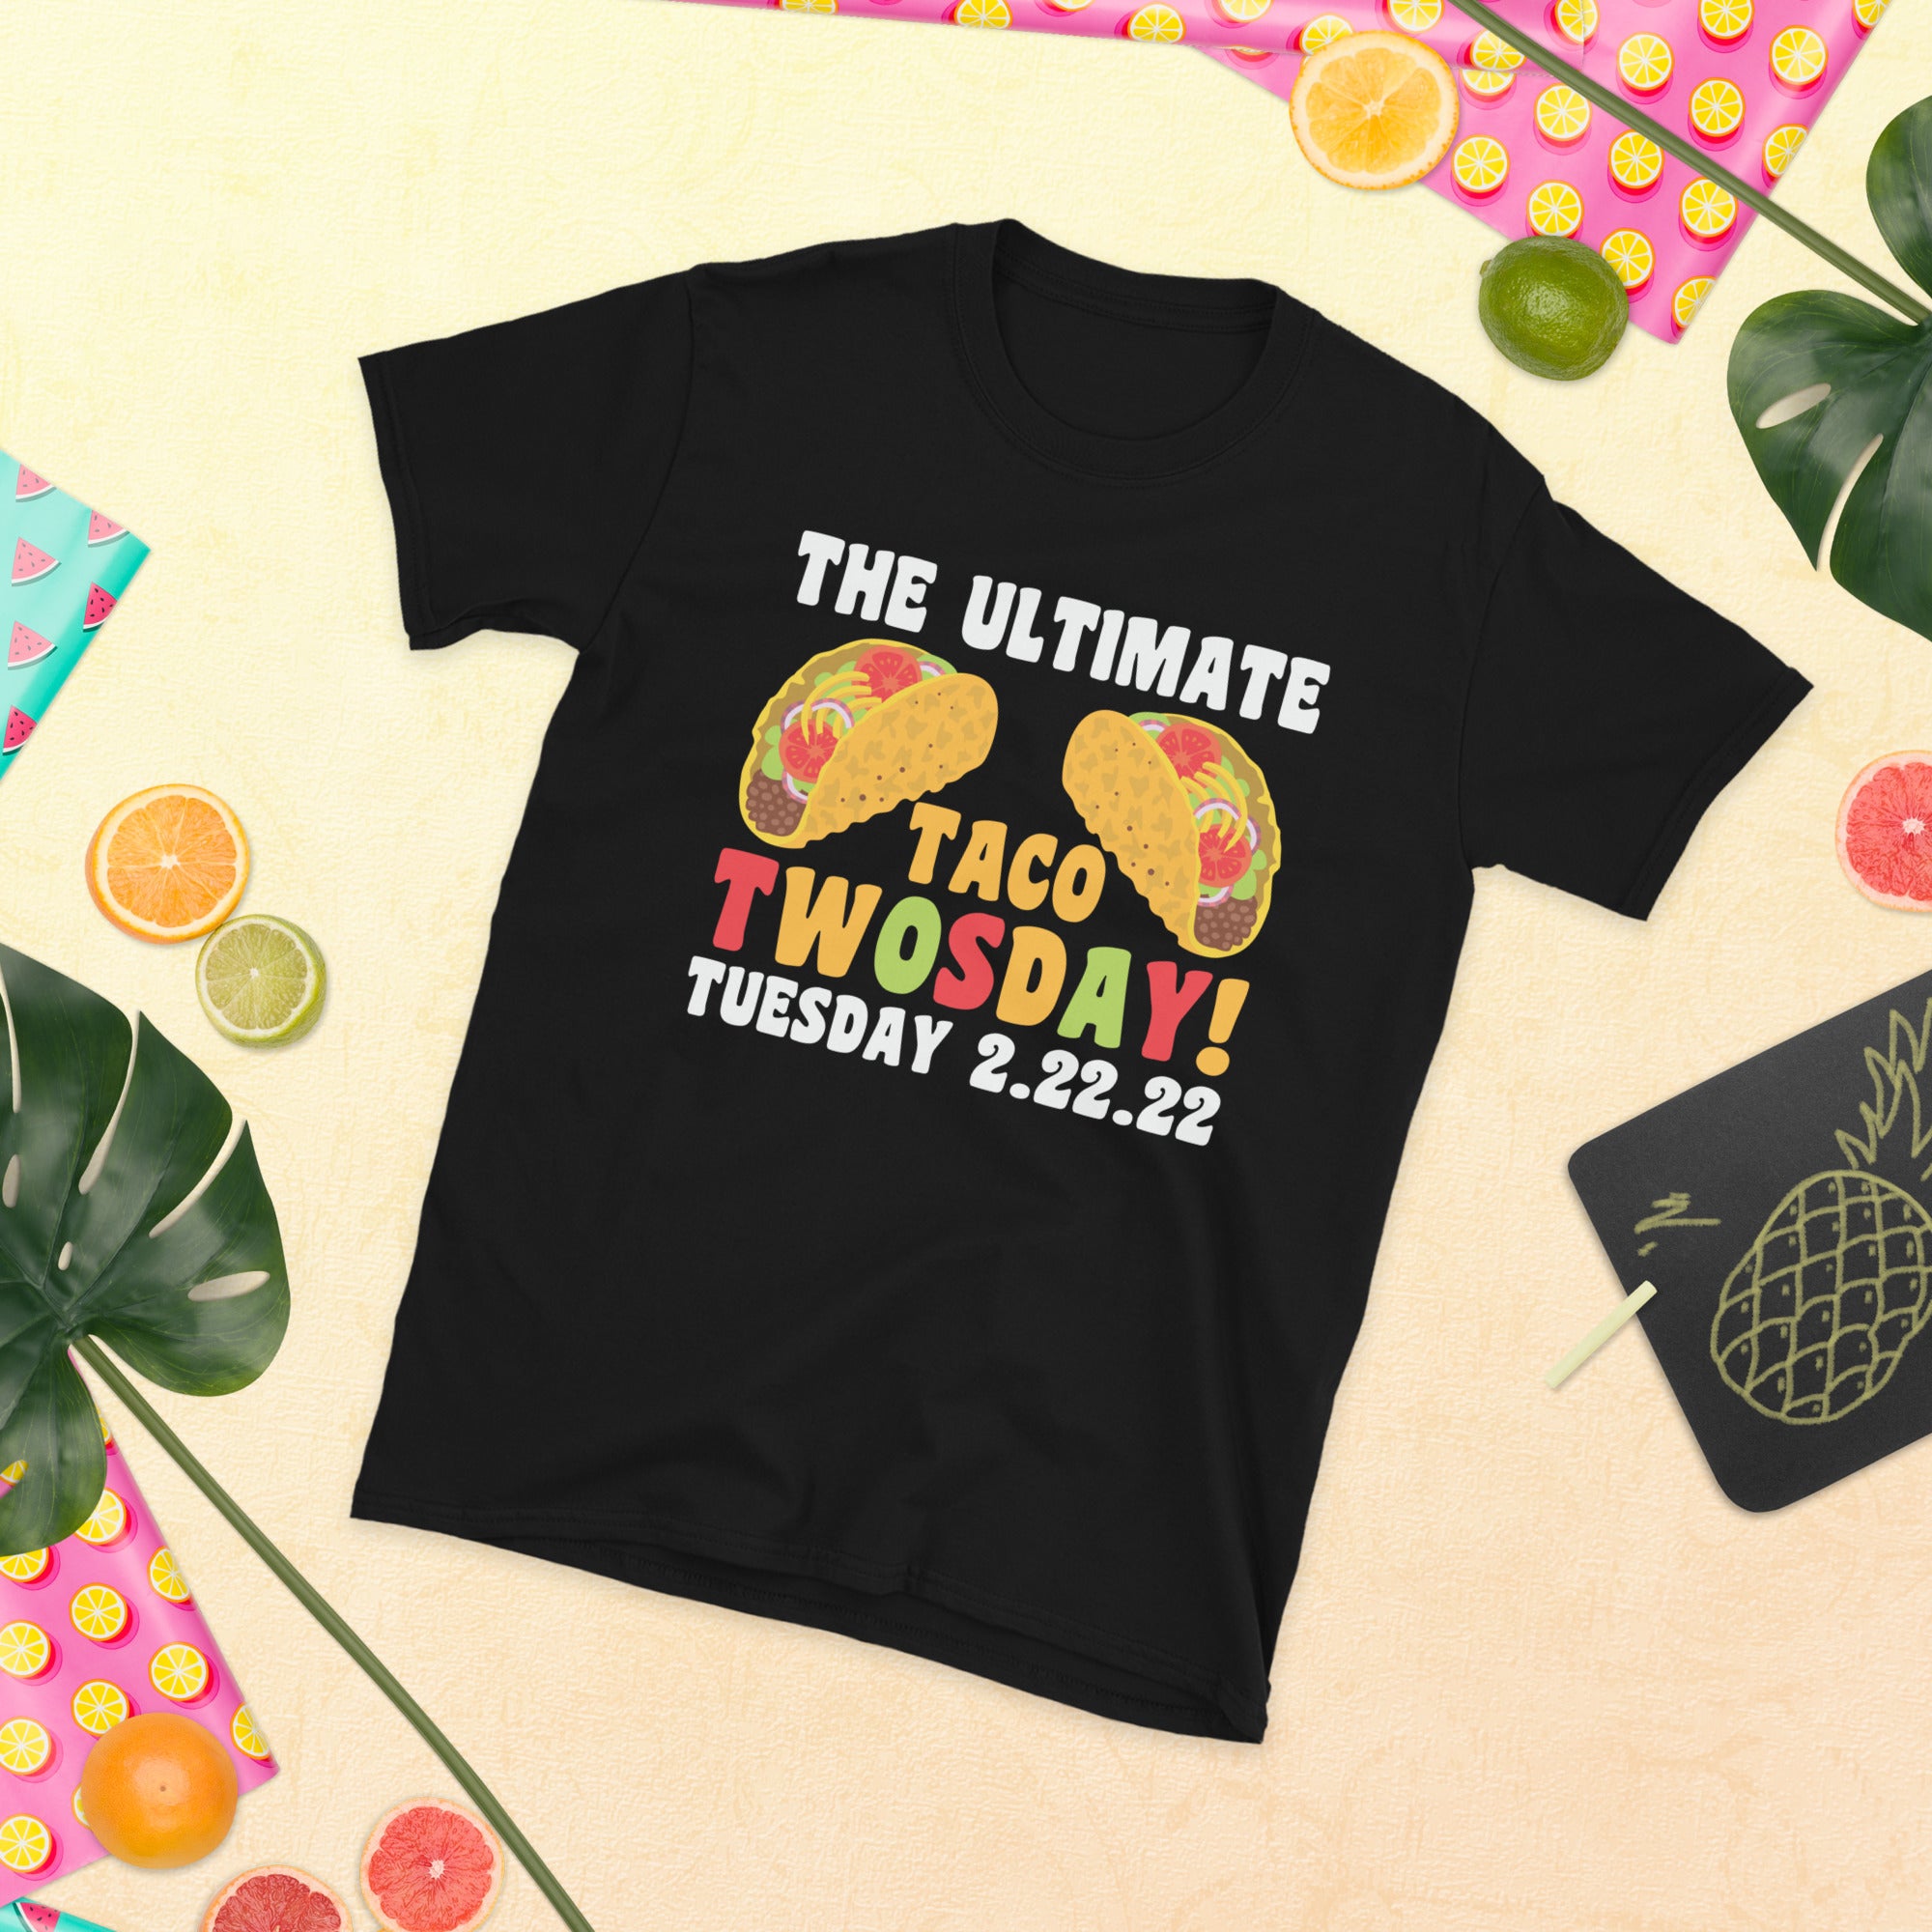 Taco Twosday Shirt, Tacos Liebhaber Tshirt, Dienstag 22.02.22, Taco Tuesday Tee, The Ultimate Taco Twosday, 22. Februar 2022, Lustiges Twosday Geschenk